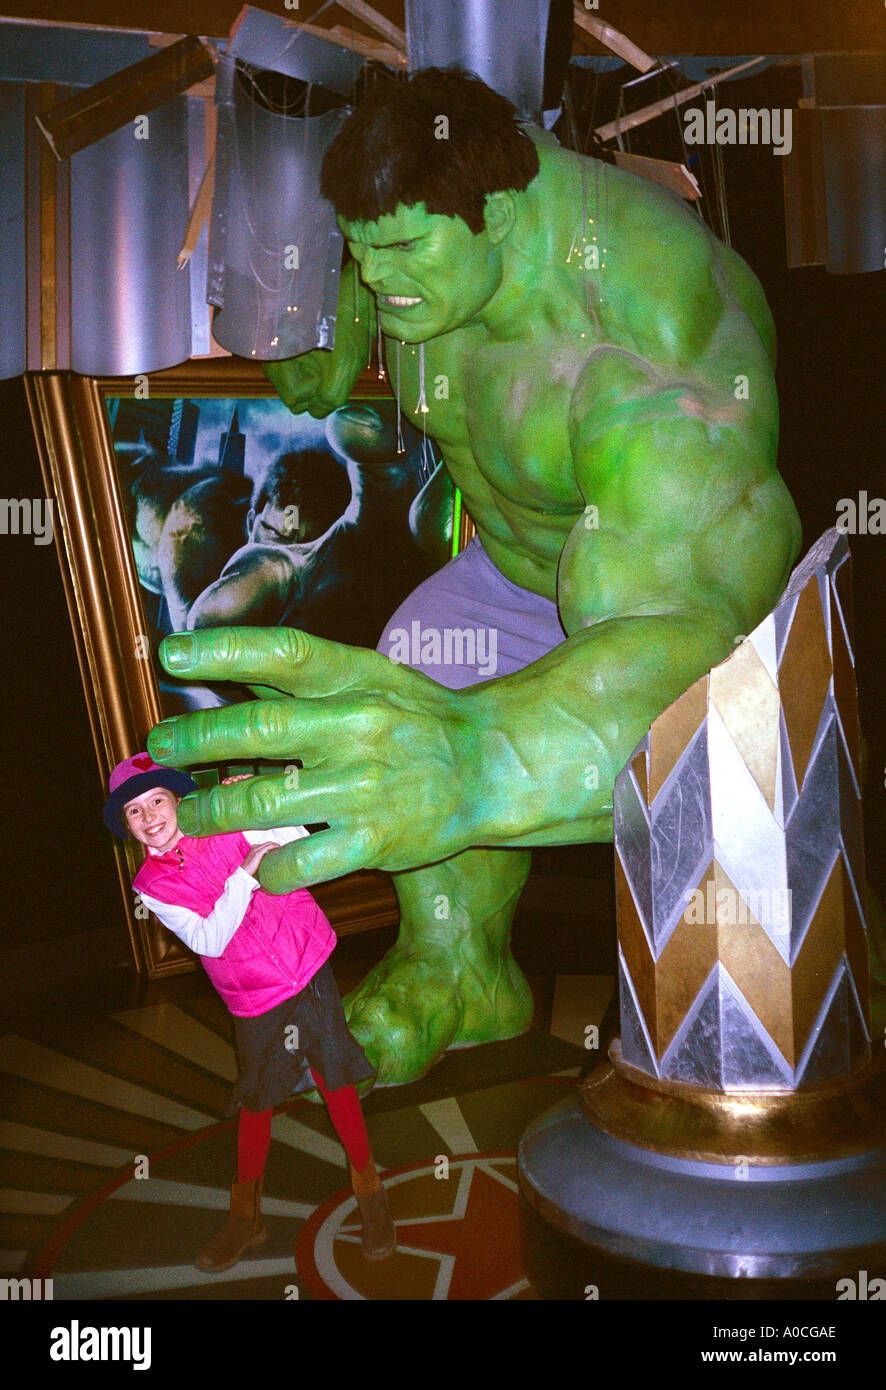 Take your photo with THE HULK at Madame Tussauds London! Stock Photo